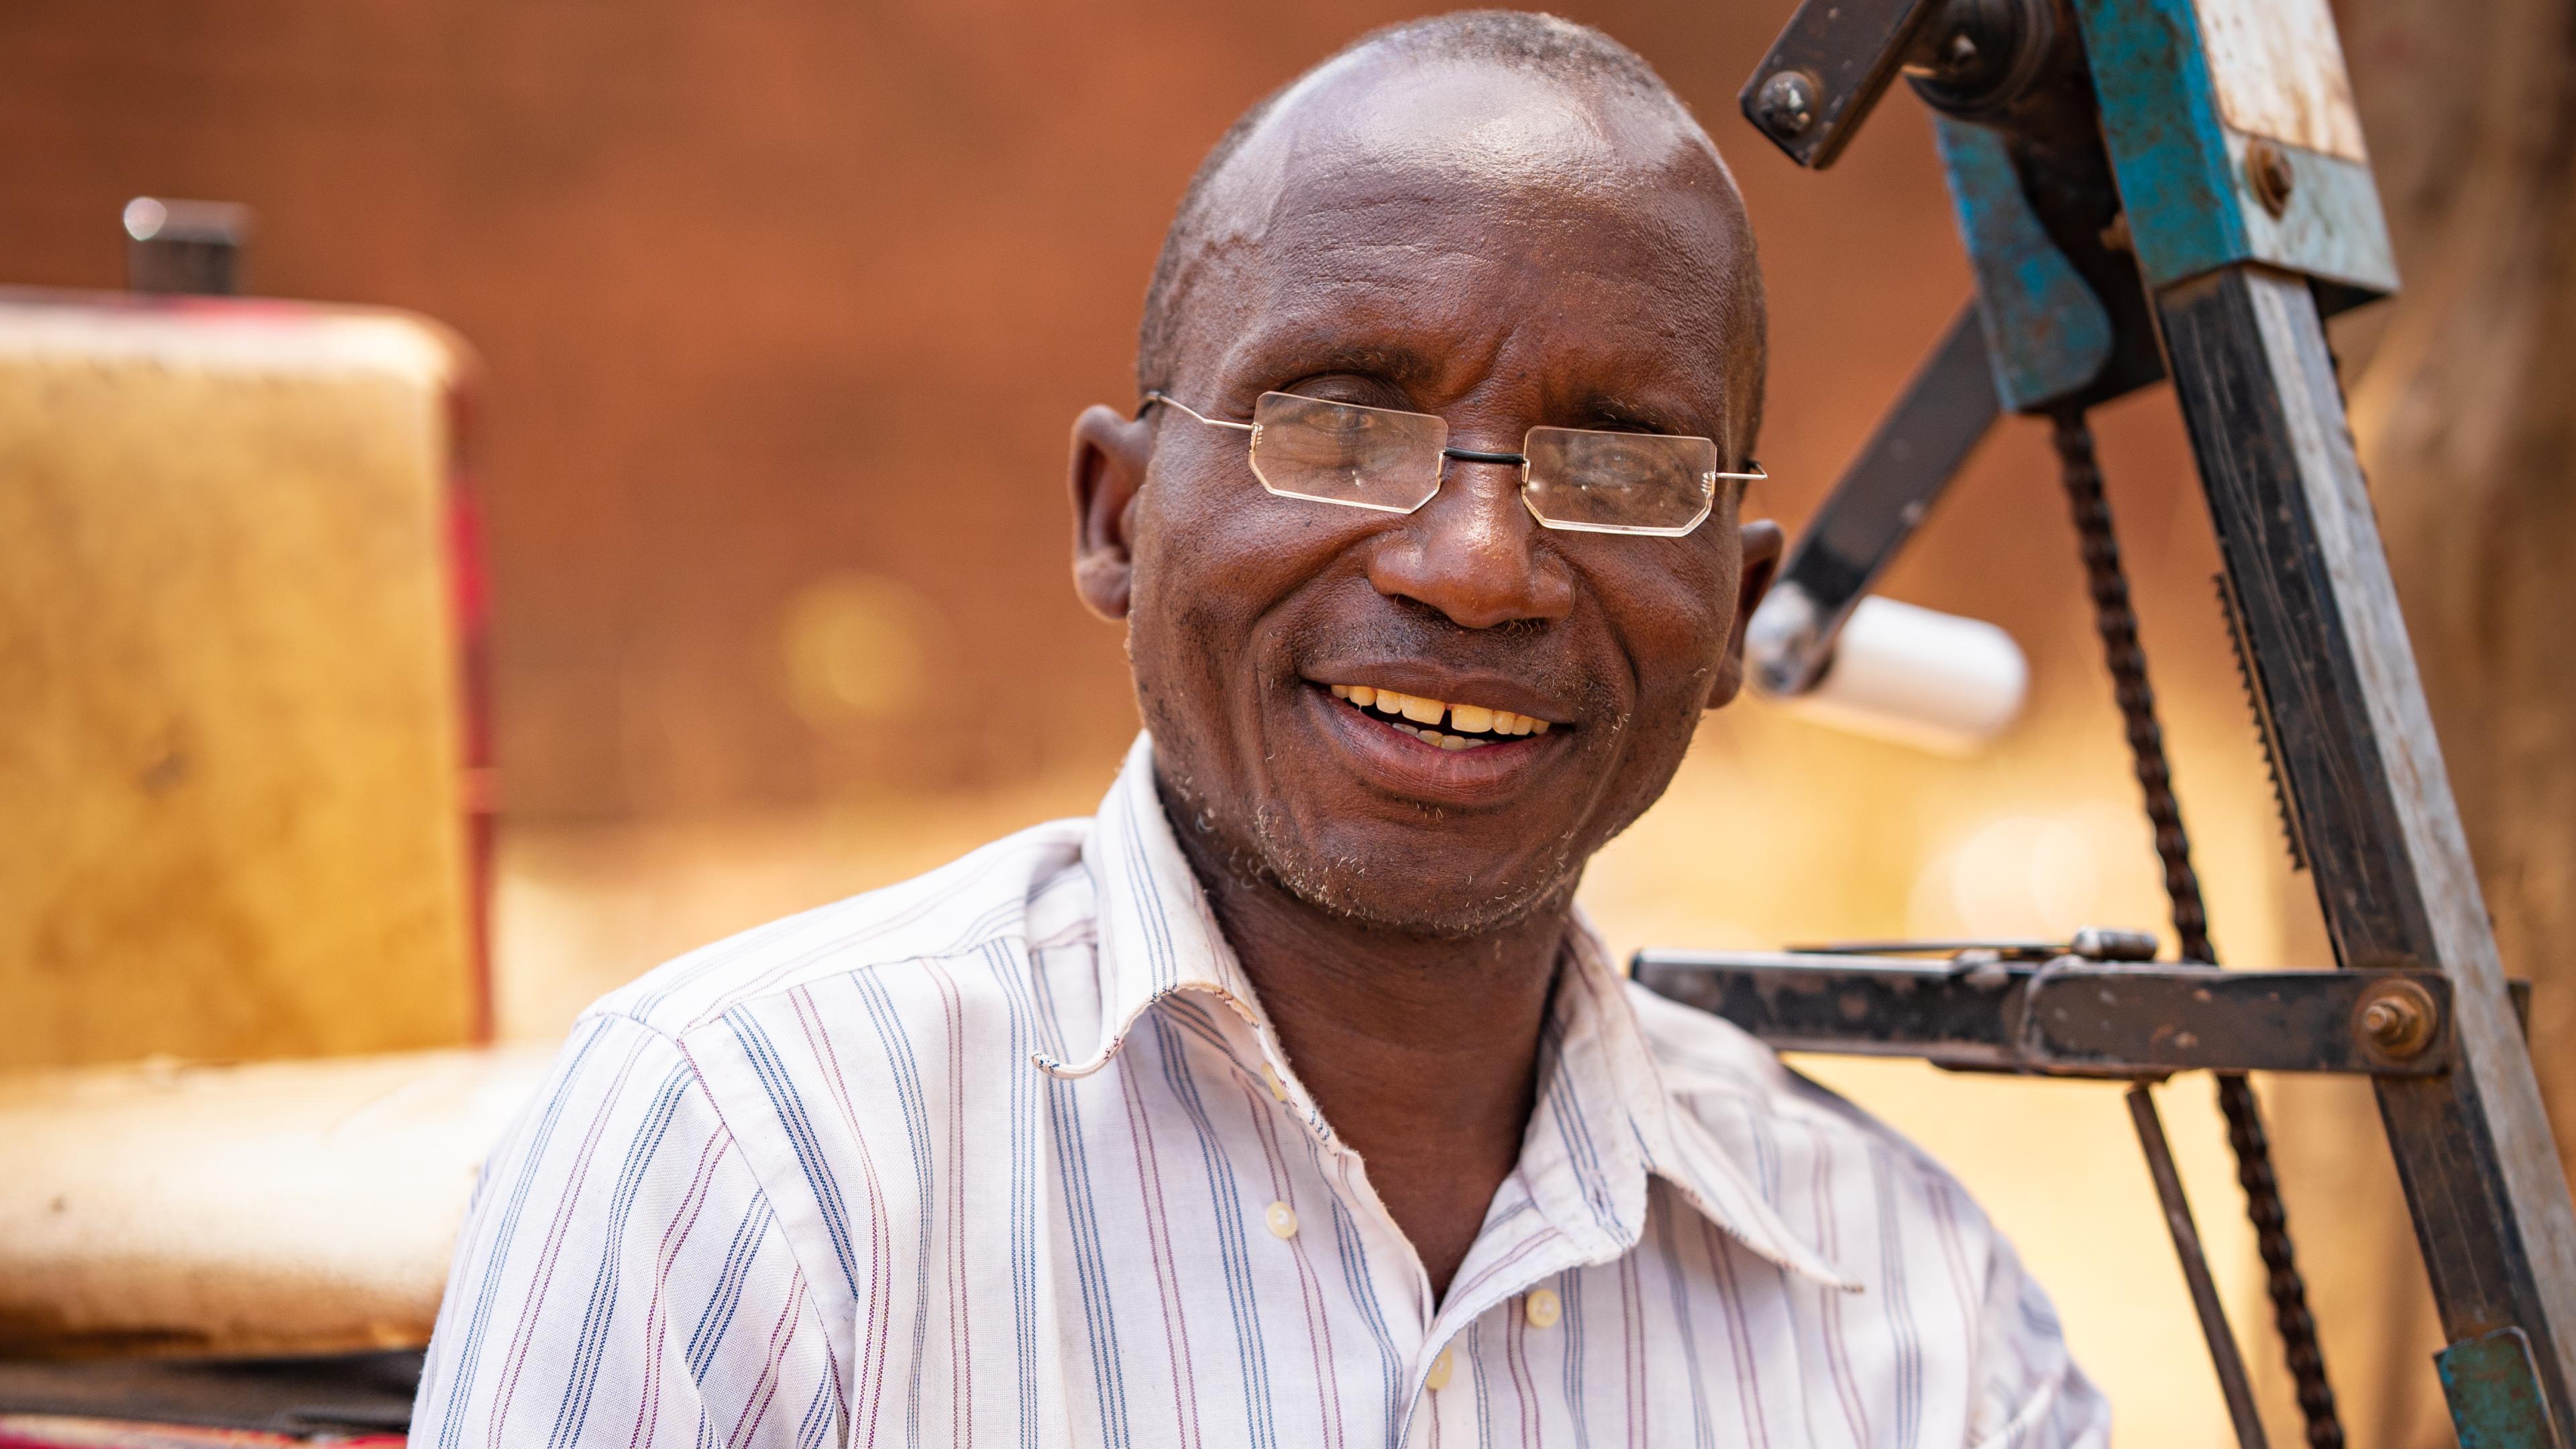 Malawian man laughs with glasses